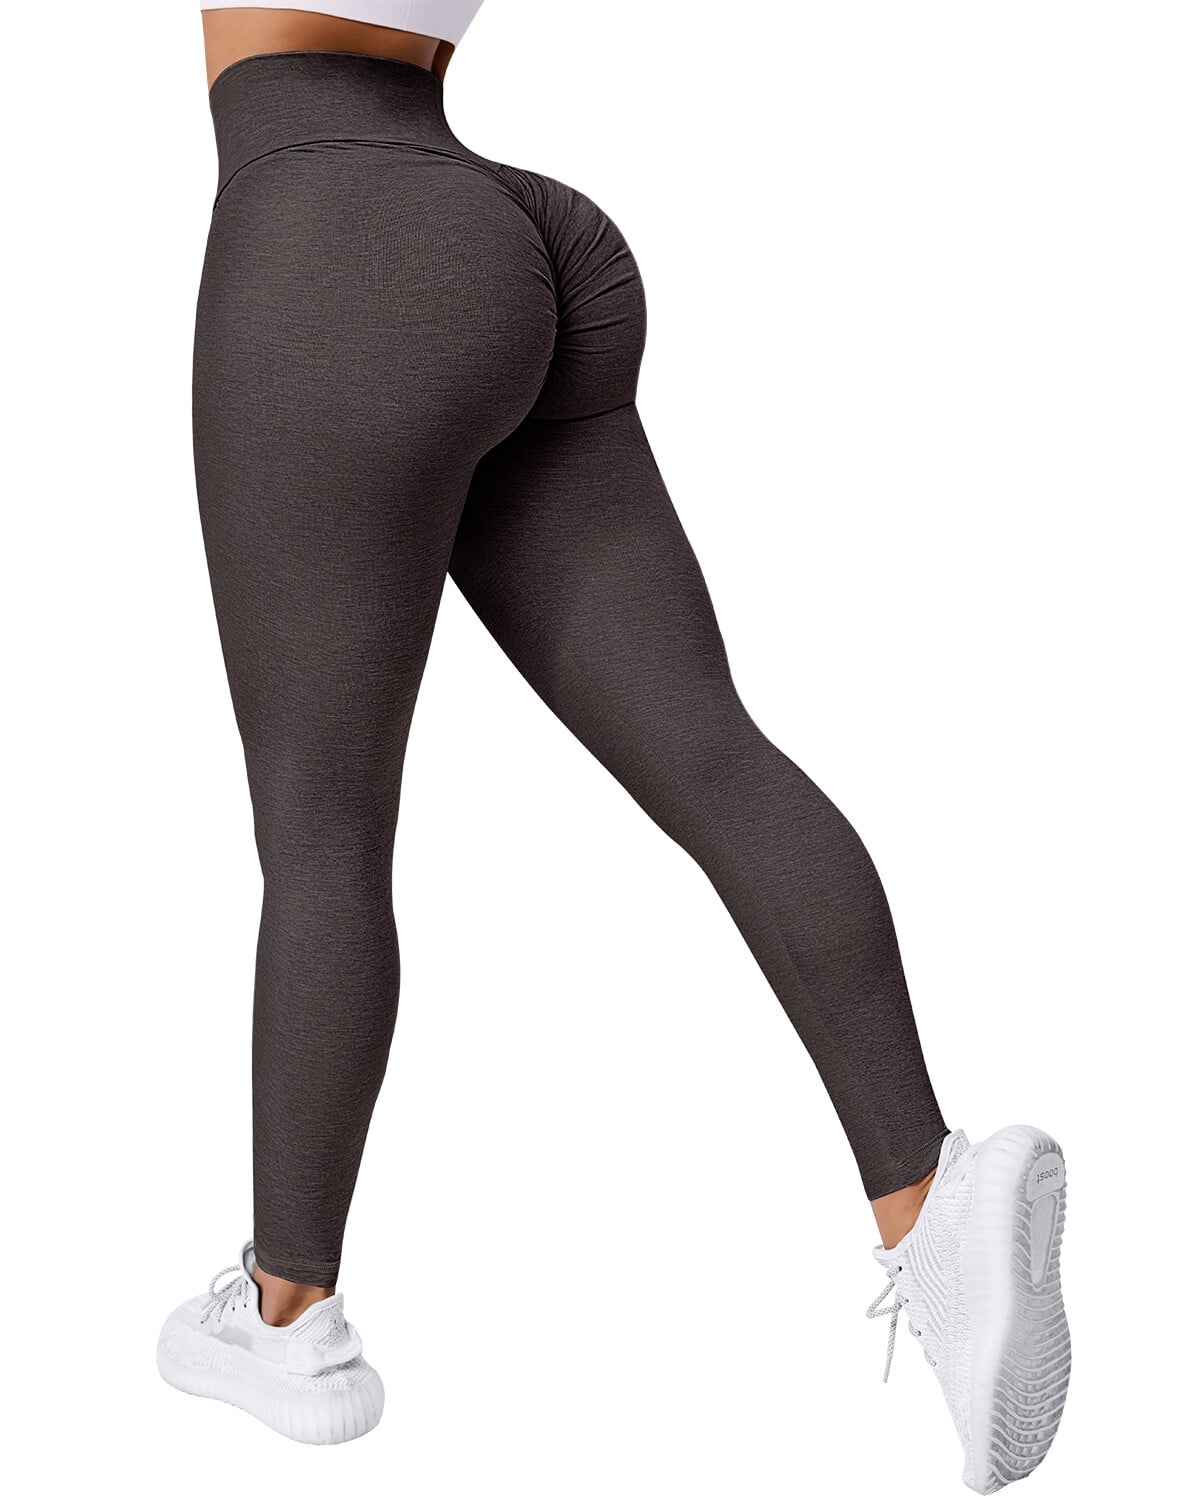 Women's Leggings Extra-Long (height from 176 cm) E-store  -  Polish manufacturer of sportswear for fitness, Crossfit, gym, running.  Quick delivery and easy return and exchange